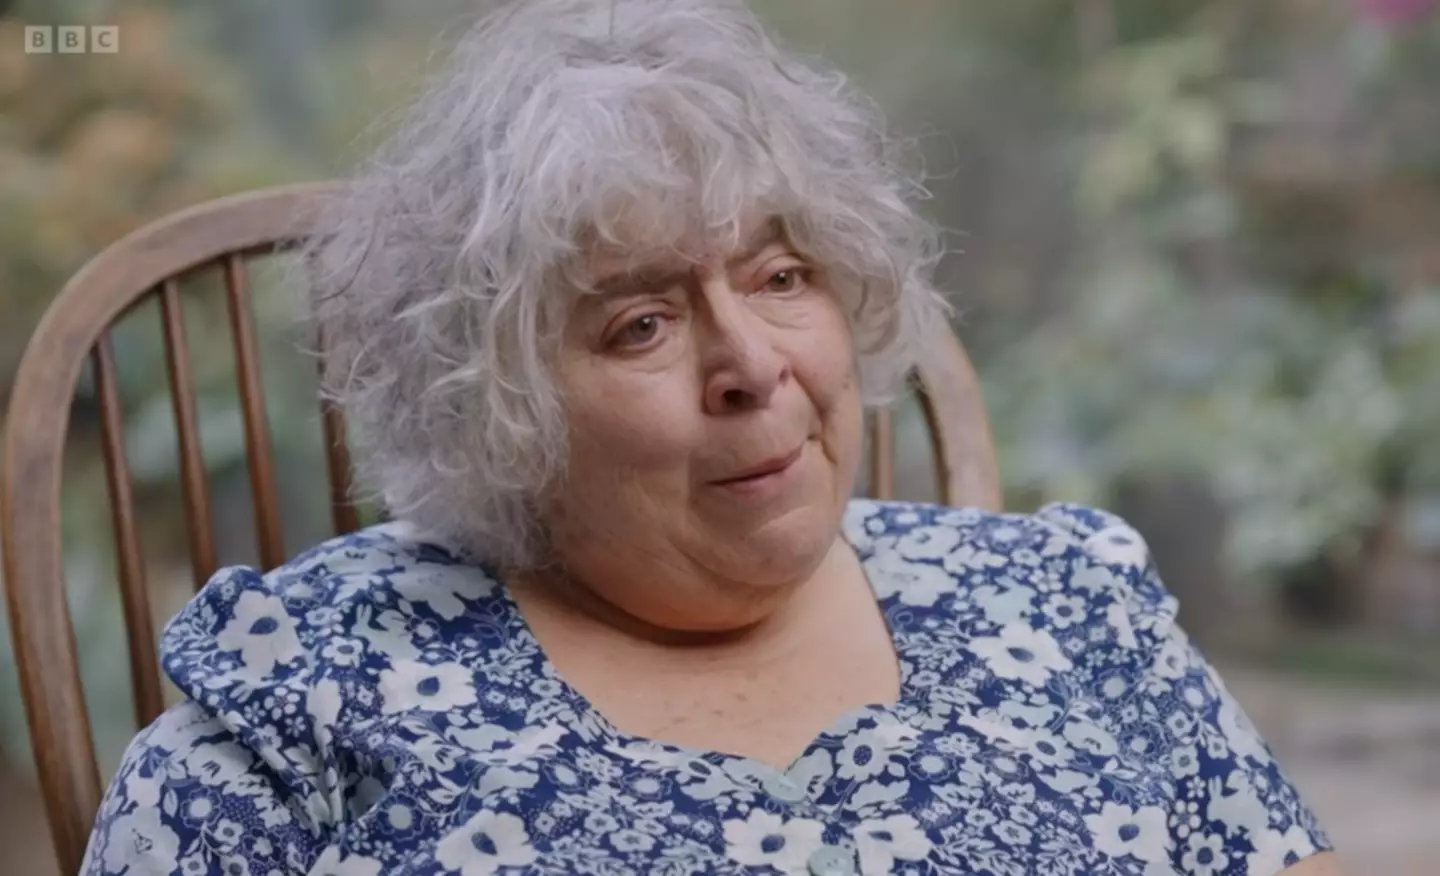 Miriam Margolyes became emotional when she described how her mother forgave her.